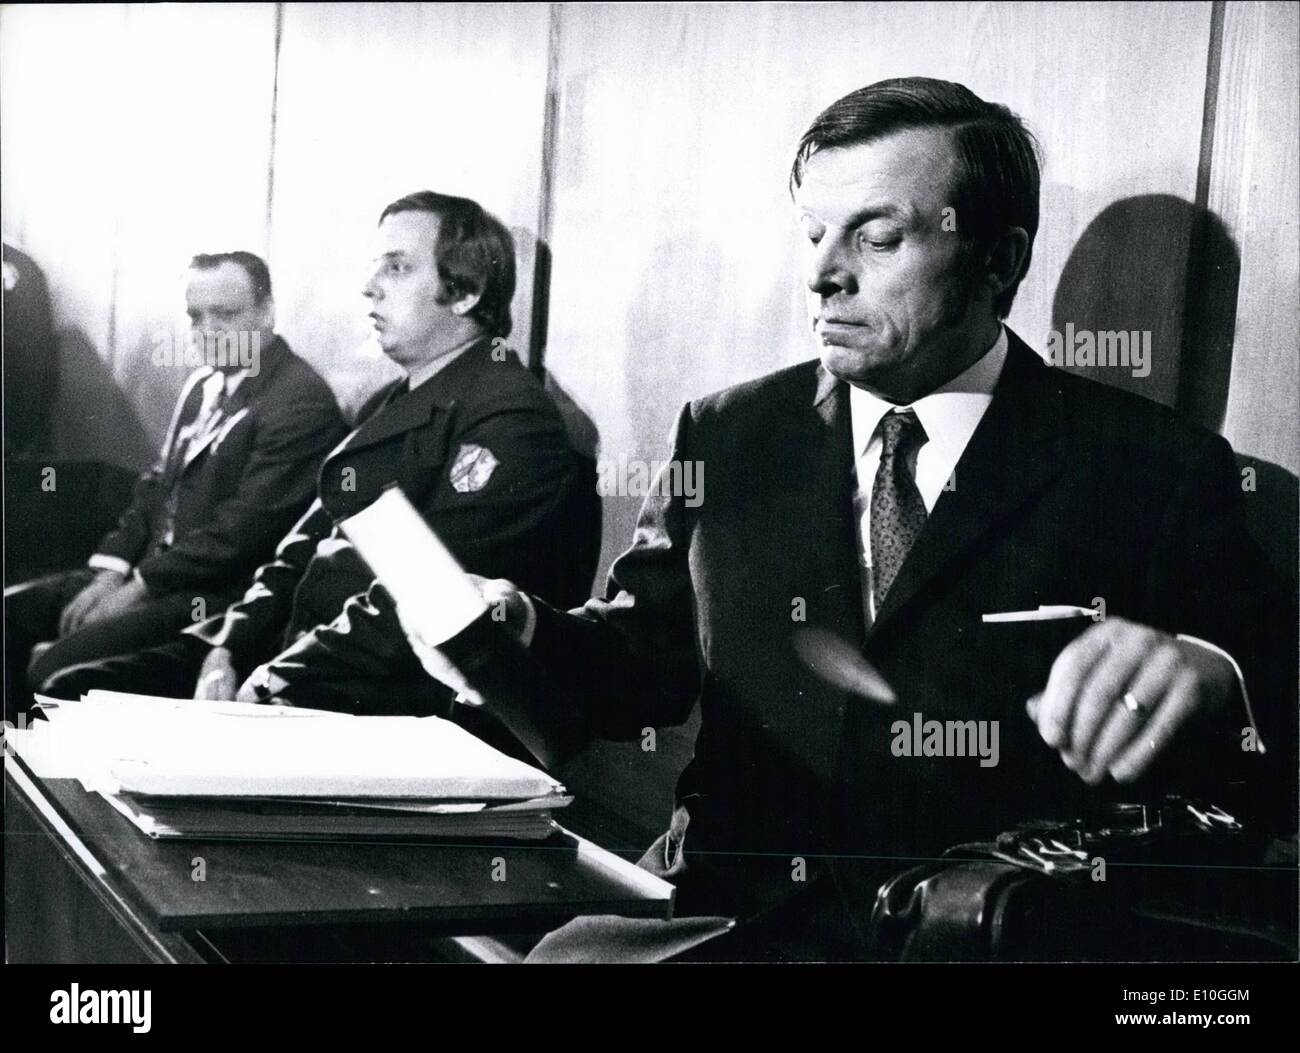 Jan. 01, 1973 - Legal proceedings against the Albrecht kidnappers have begun. The trial of the former attorney Heinz Joachim Ollenburg (47) and the 40 years old Paul Kron has begun before the superior Court in Essen (West Germany). At the end of November 1971 they kidnapped millionaire Theo Albrect. He was held in a room next door to Ollenburg's attorney practise in Dusseldorf for 17 days. After the ransom of 7 million marks was paid, he was set free. Only half of this money has been recovered so far. OPS: Heinz Joachim Ollenburg (right) and Paul Kron (on the left side) in the dock. Stock Photo